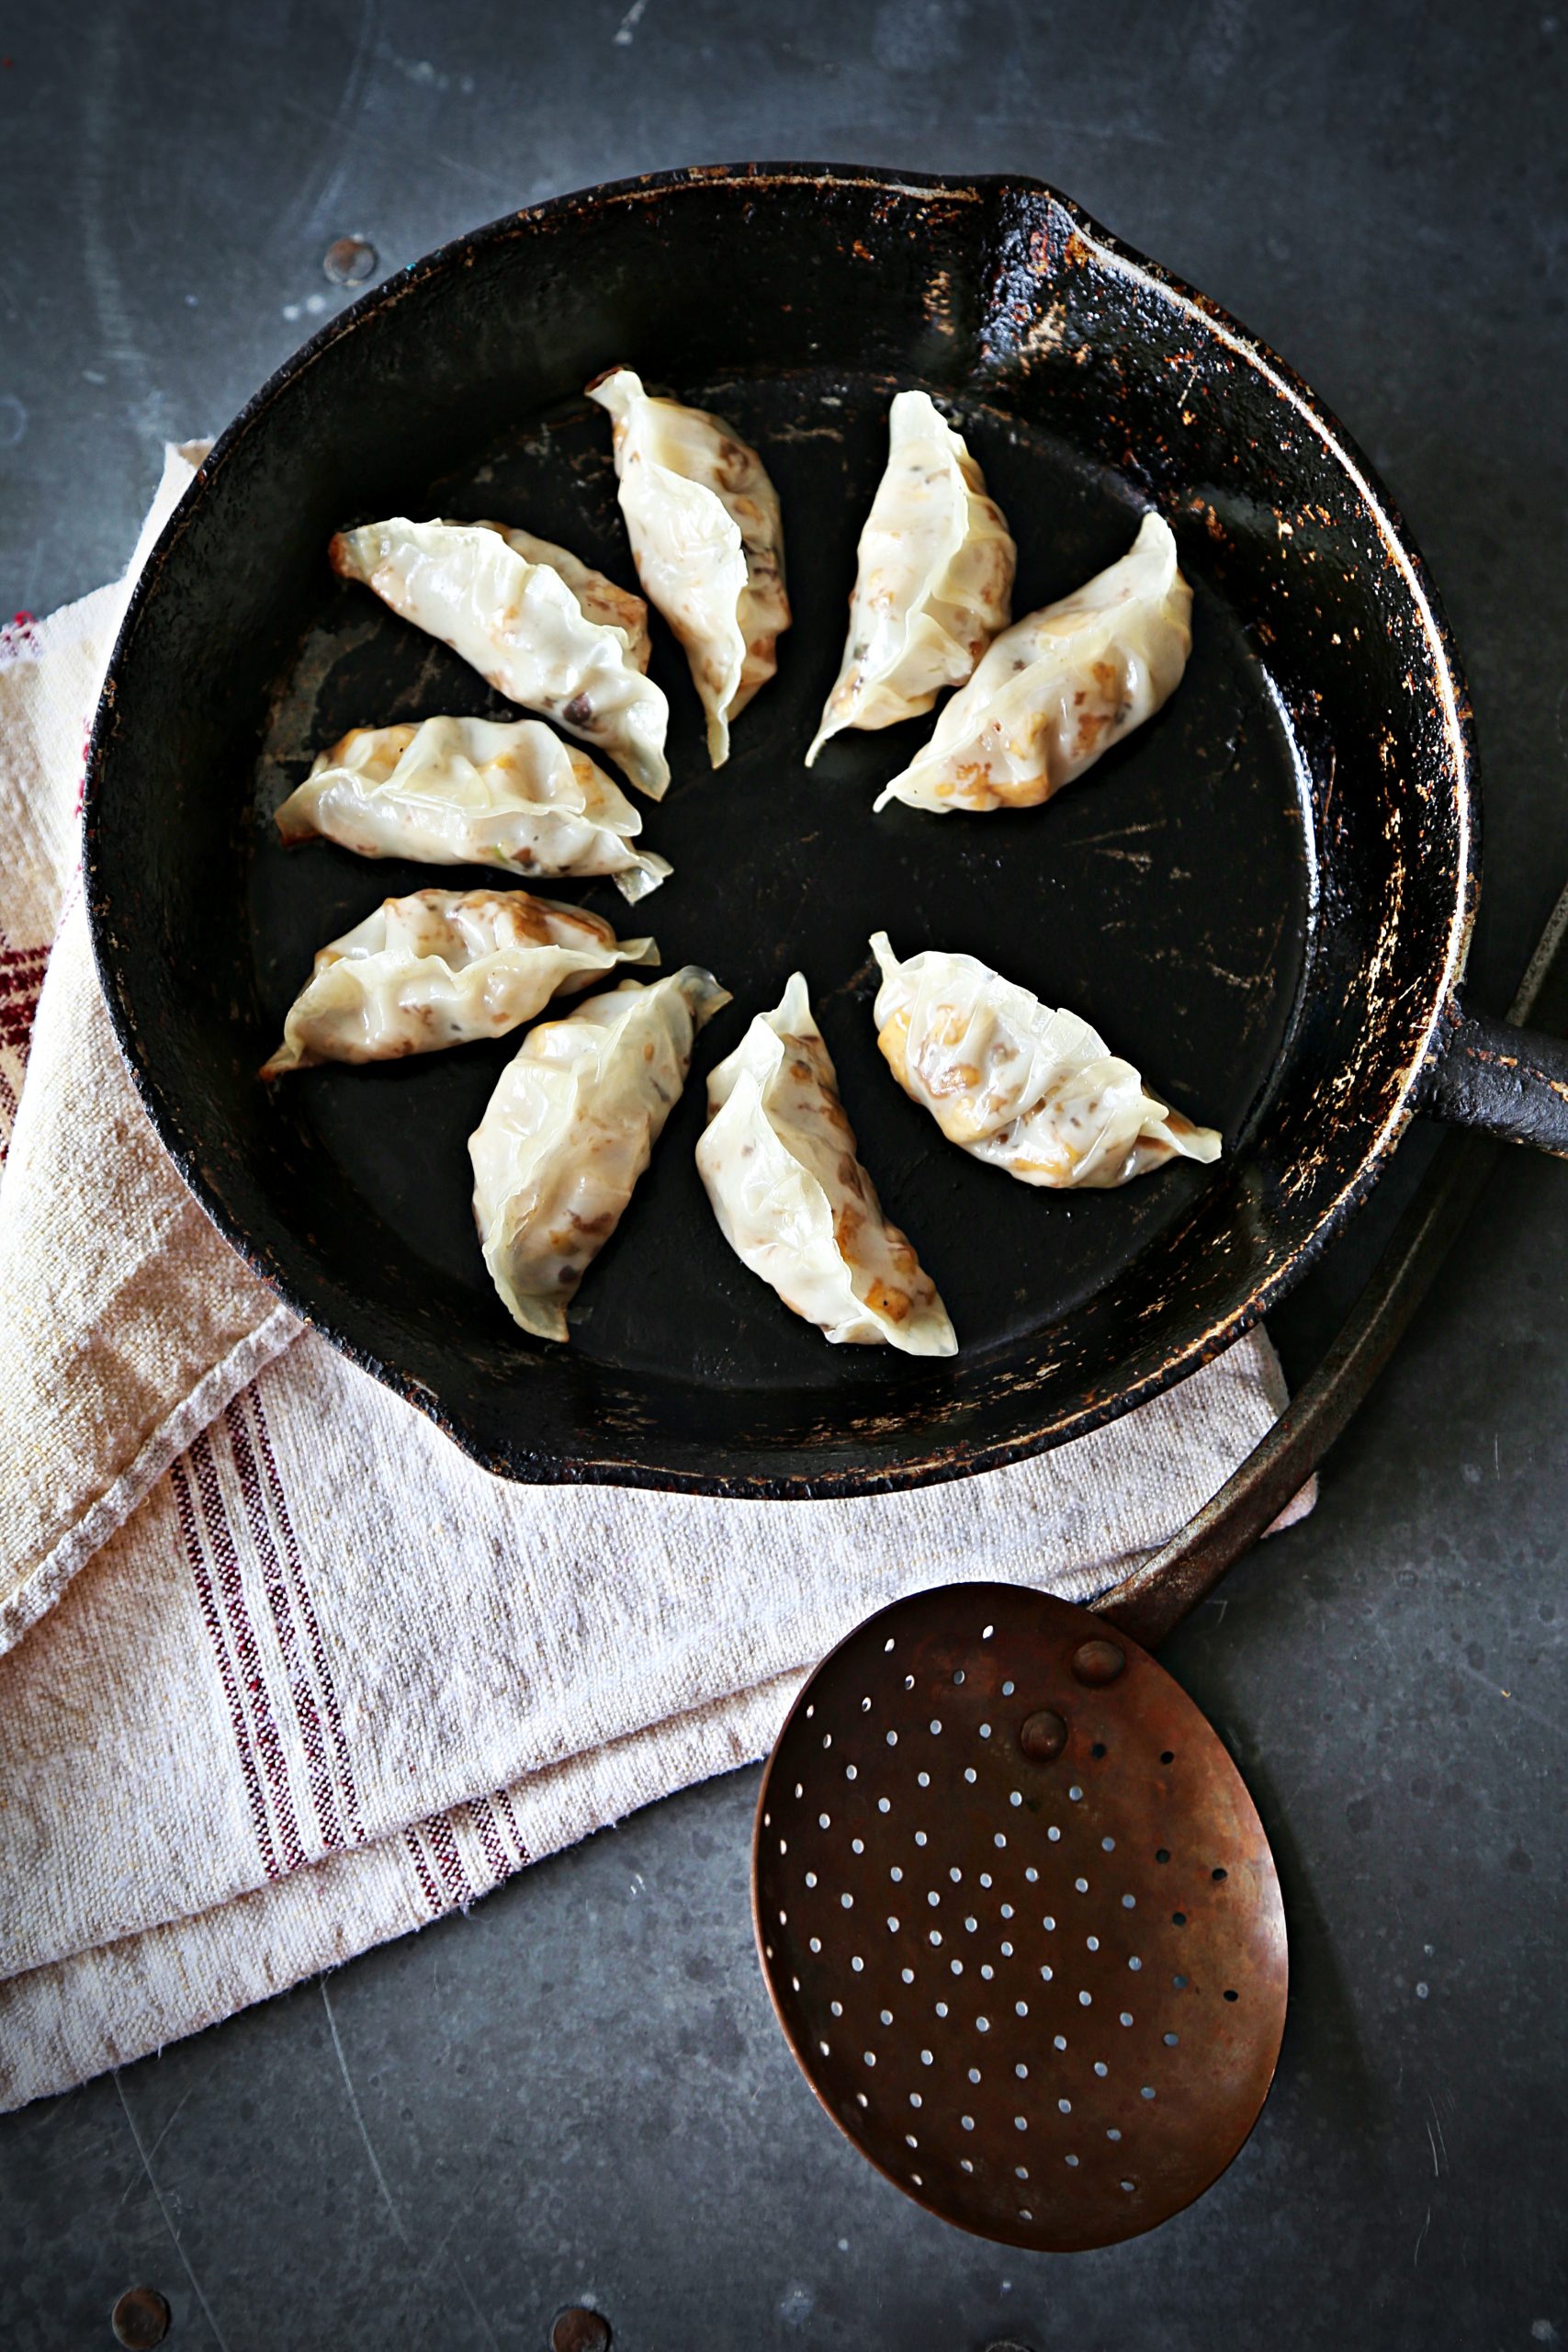 pot stickers pic: Kerstin Rodgers